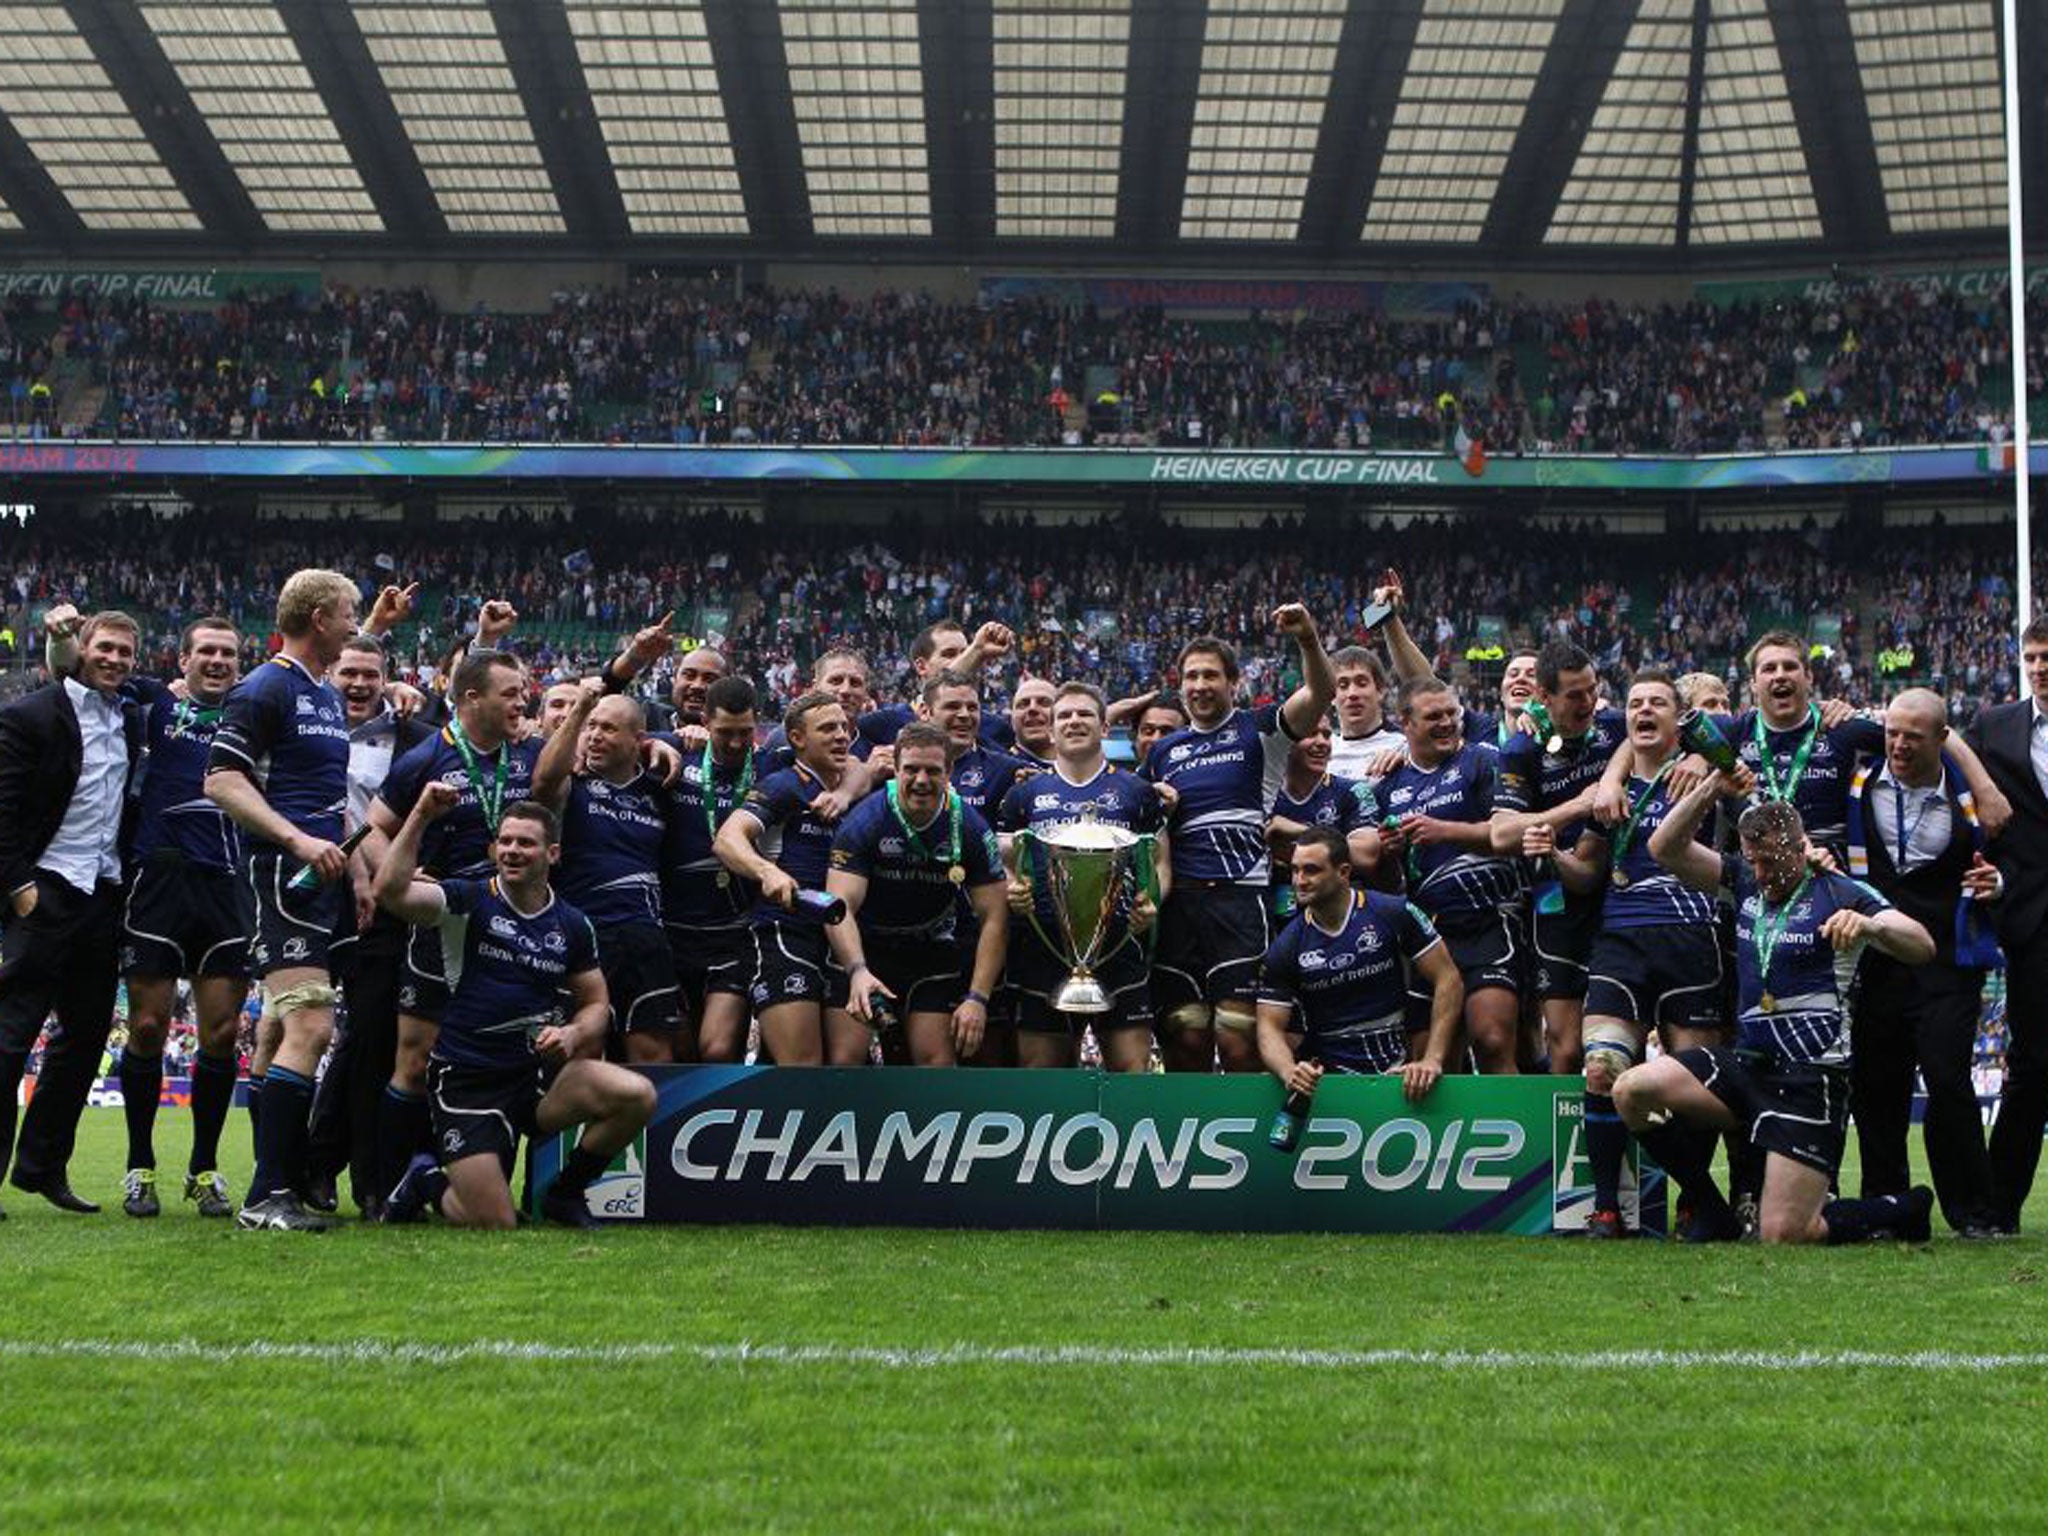 Leinster celebrate beating Ulster to win this year’s Heineken Cup. The competition might benefit if Irish clubs faced a tougher battle to qualify